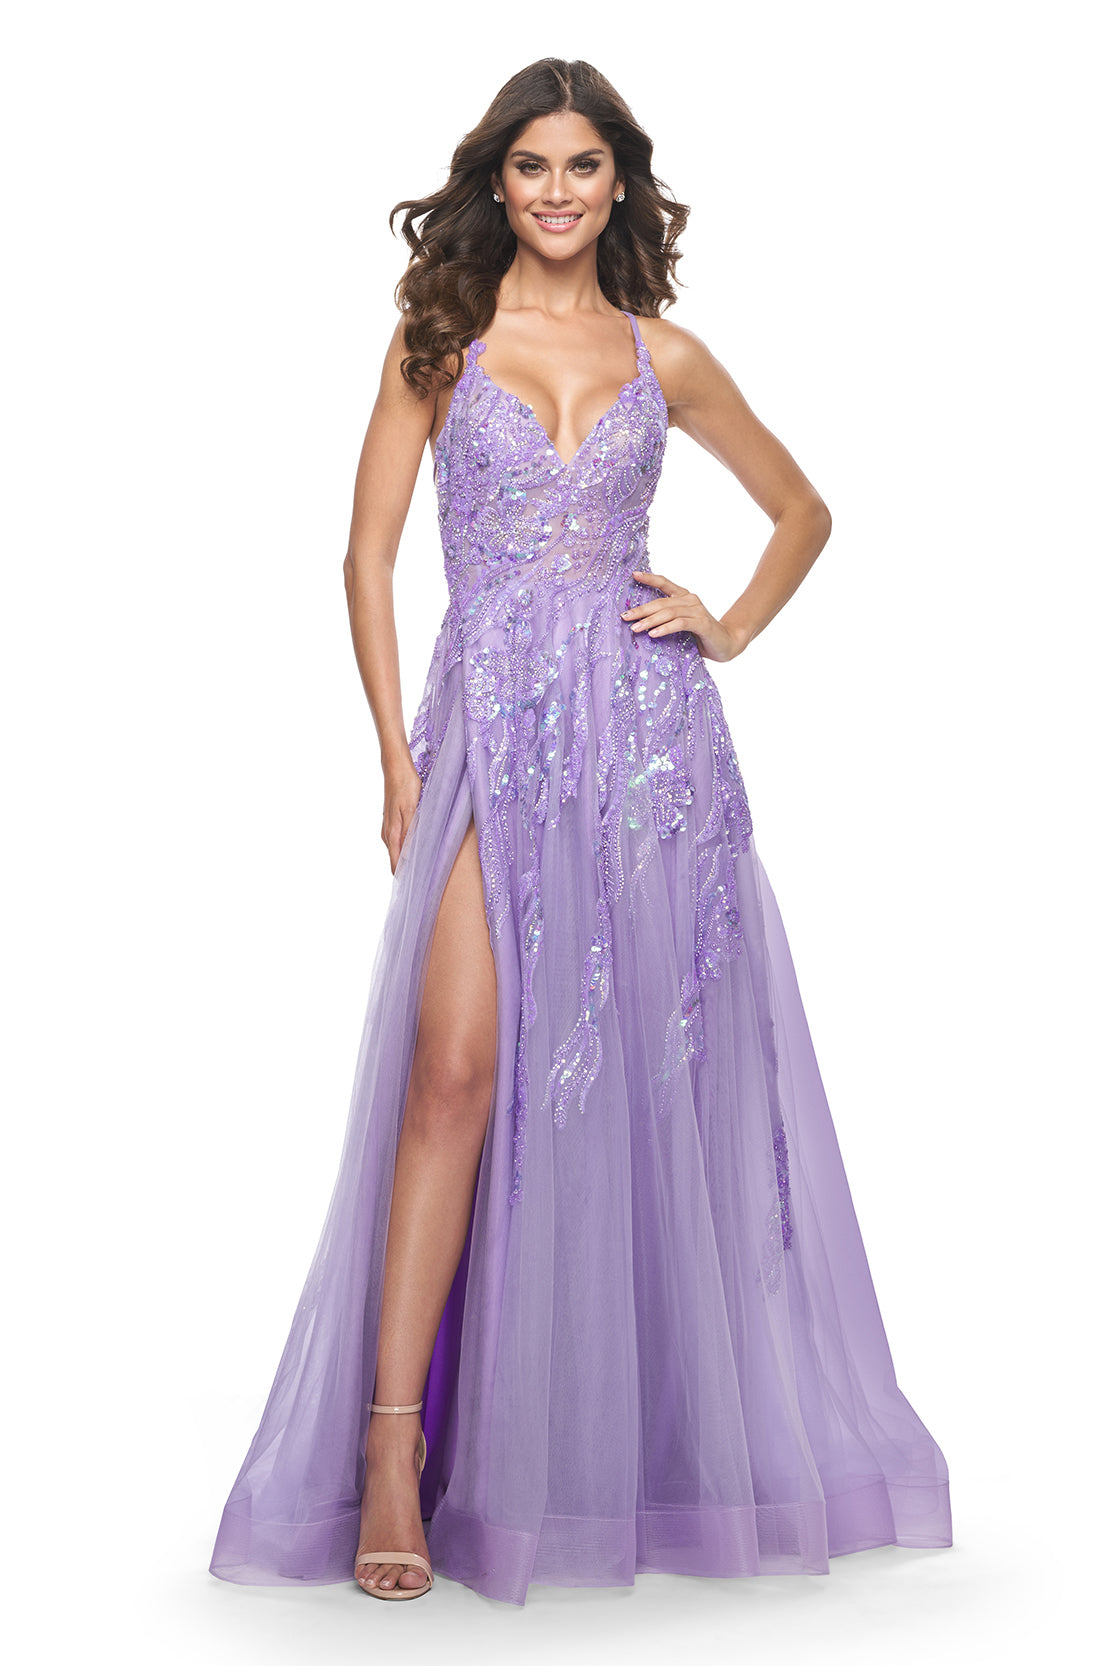 La Femme 32032 Enchanting A-Line Prom Gown - A captivating gown featuring a unique sequin beaded applique, A-line silhouette, V-shaped neckline, and adjustable lace-up back. Ideal for prom night. Model is wearing the dress in lavender.